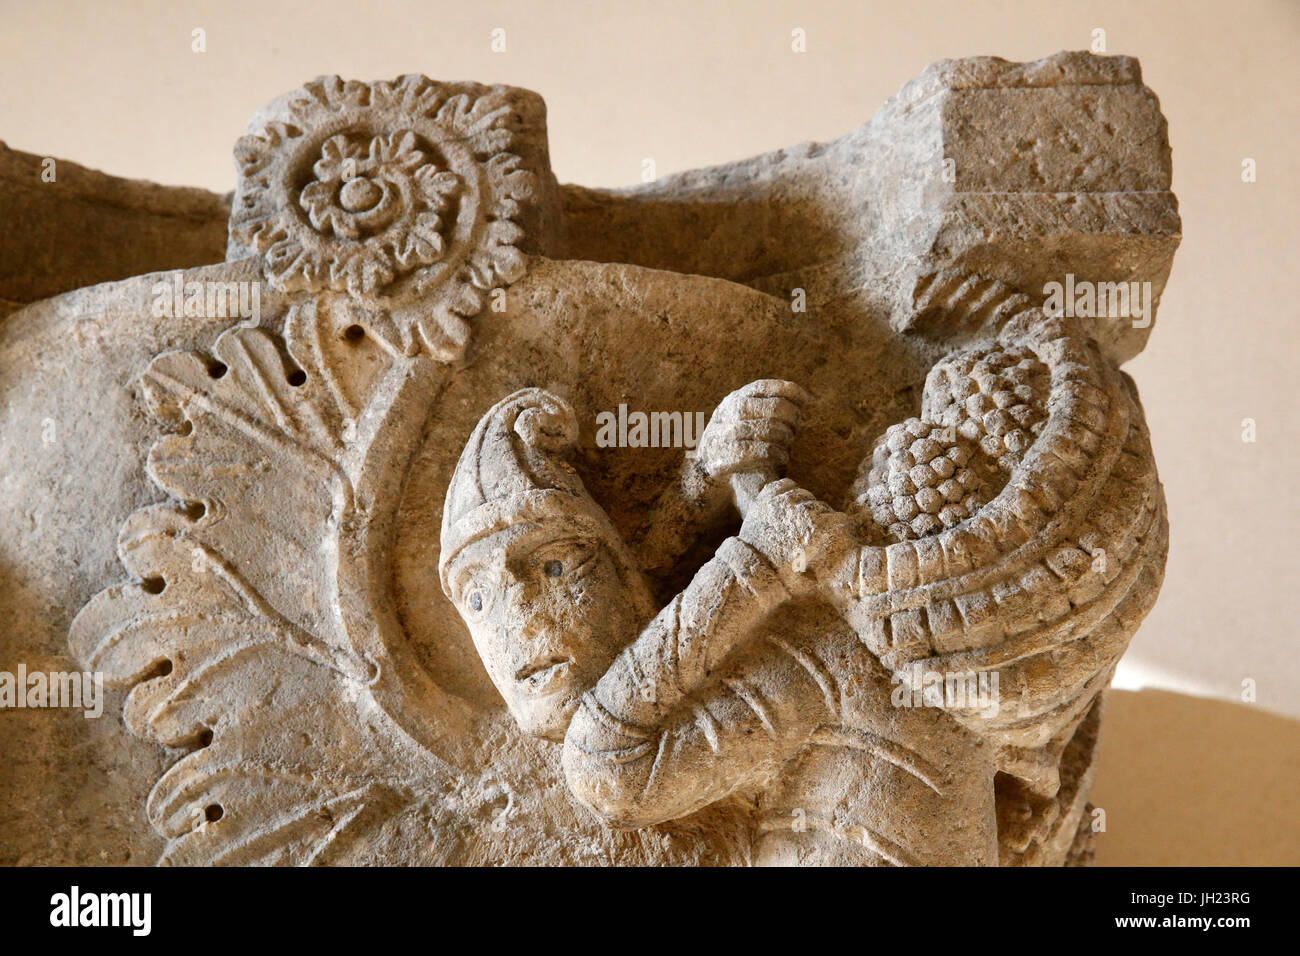 Louvre museum. Grape harvest. Stone capital from the Moutiers-Saint-Jean abbey chuch (Burgundy), c. 1125. France. Stock Photo